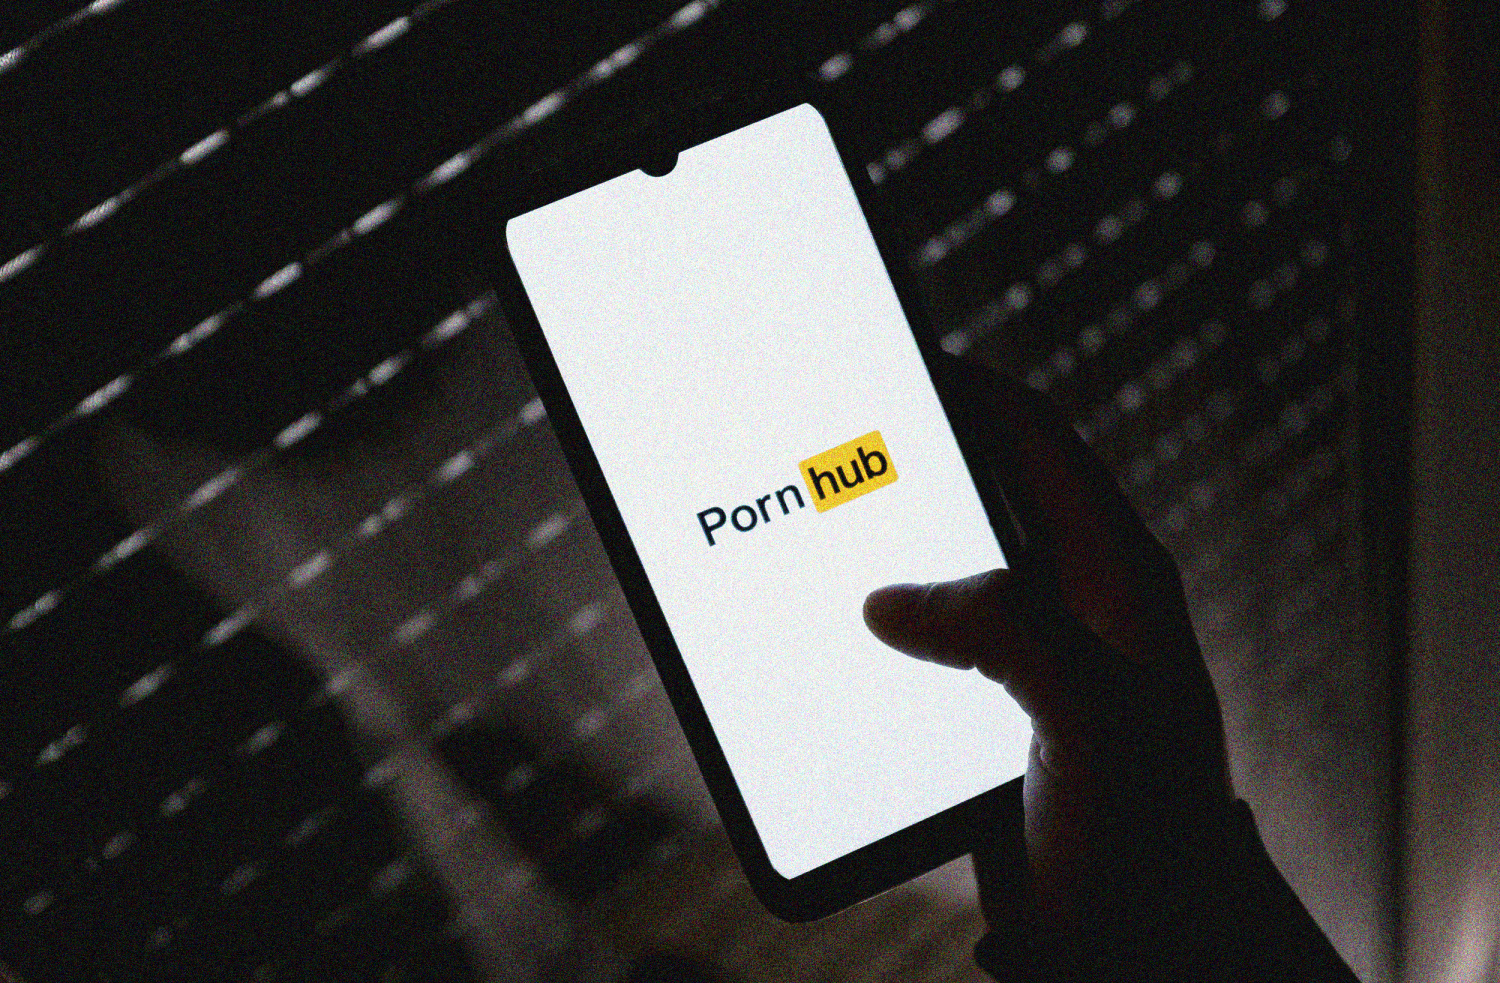 Purnhb - Meet Pornhub's new owner: Ethical Capital Partners